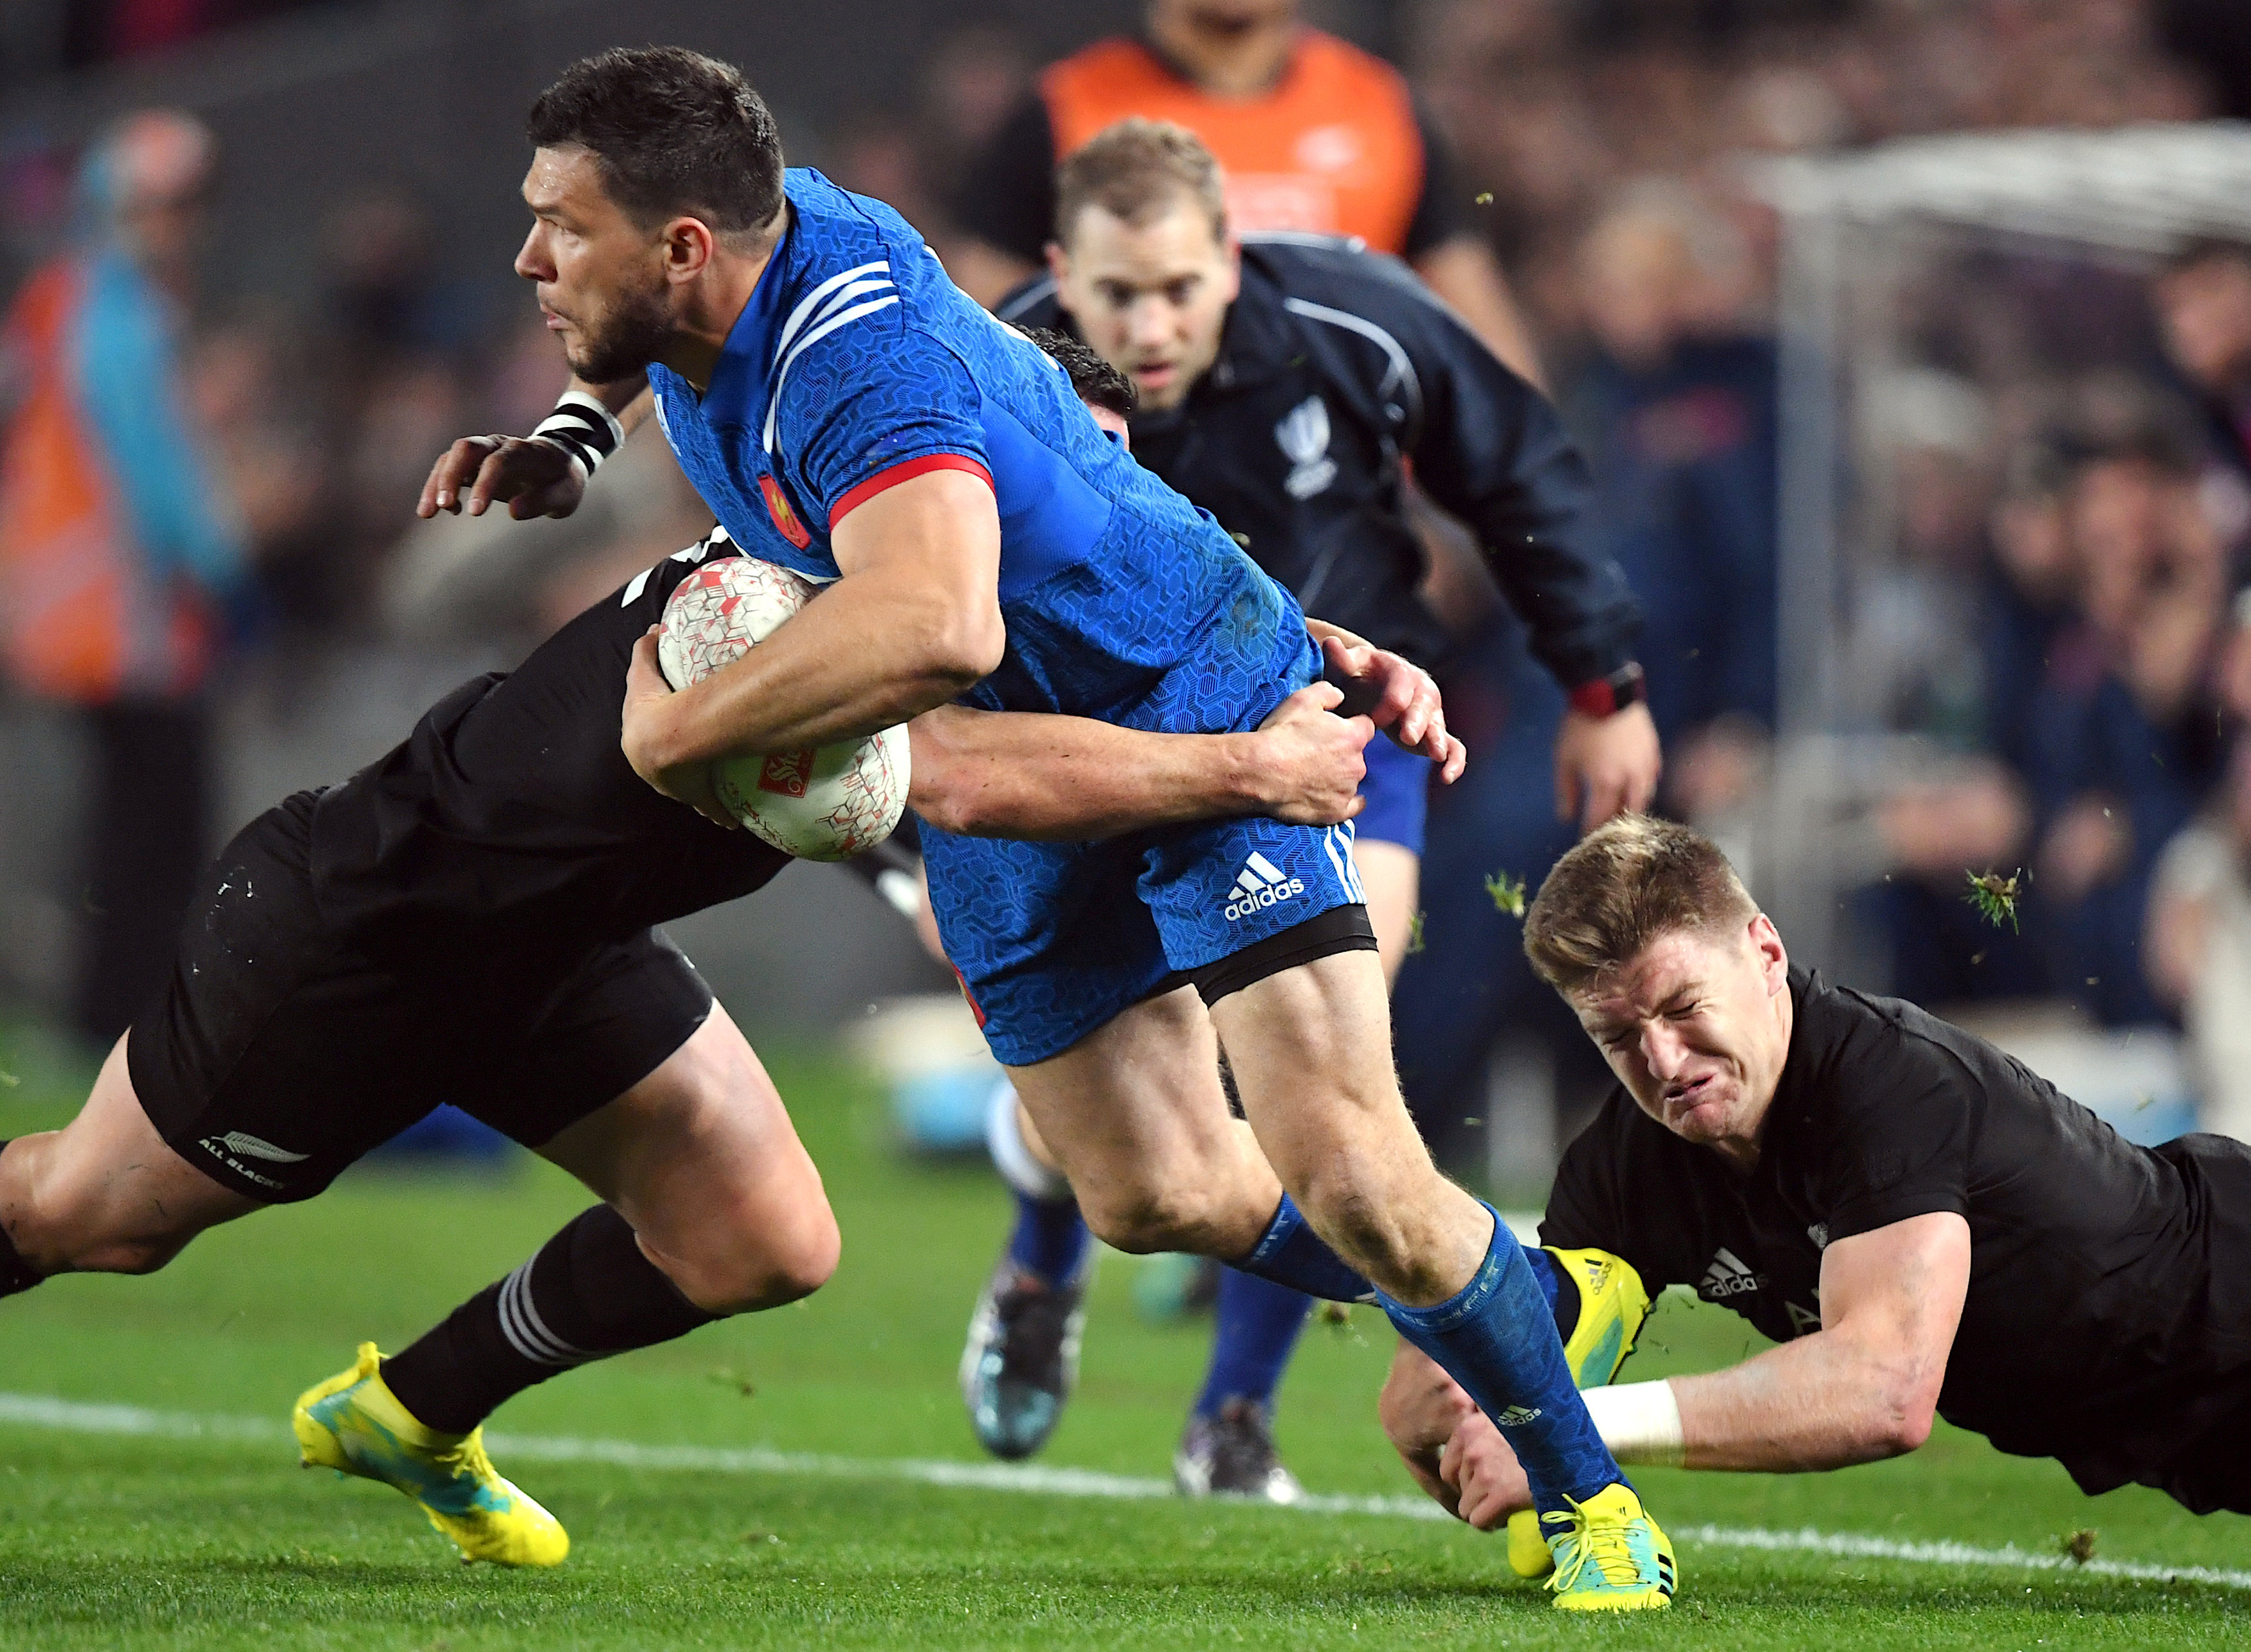 Rugby: All Blacks coach Hansen defends players for high Grosso tackle